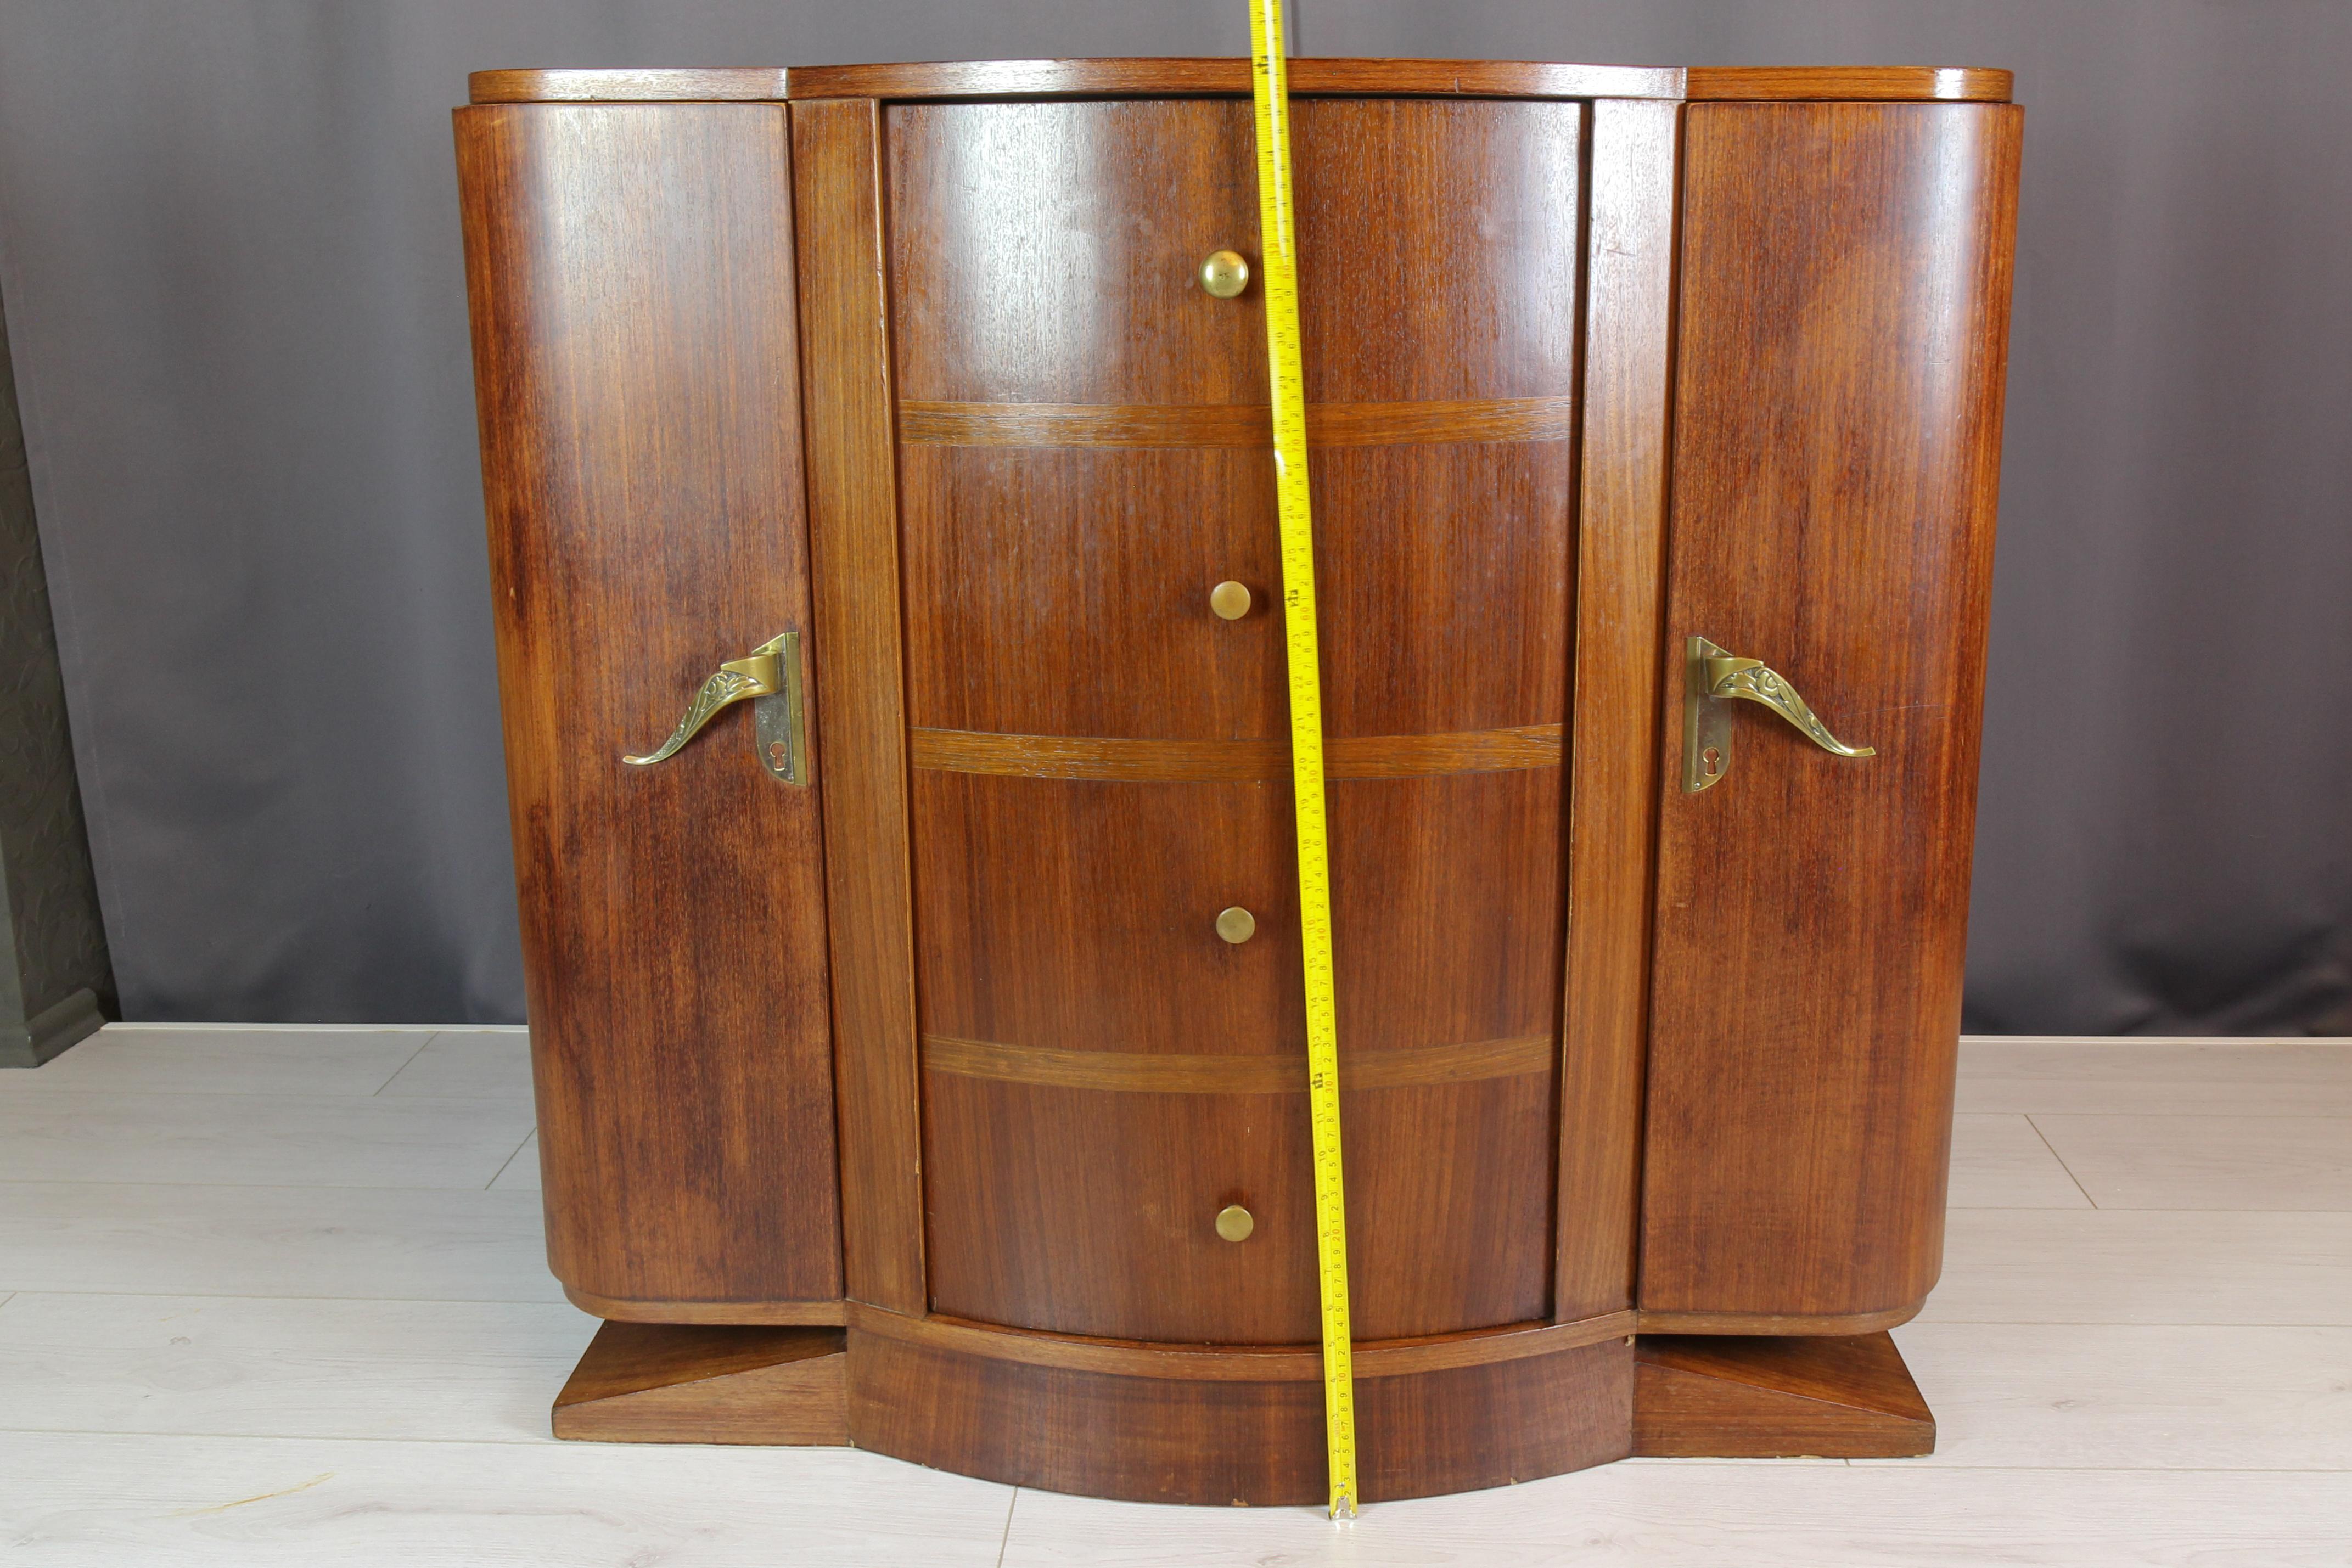 French Art Deco Sideboard with Radio and Record Player, 1930s For Sale 9